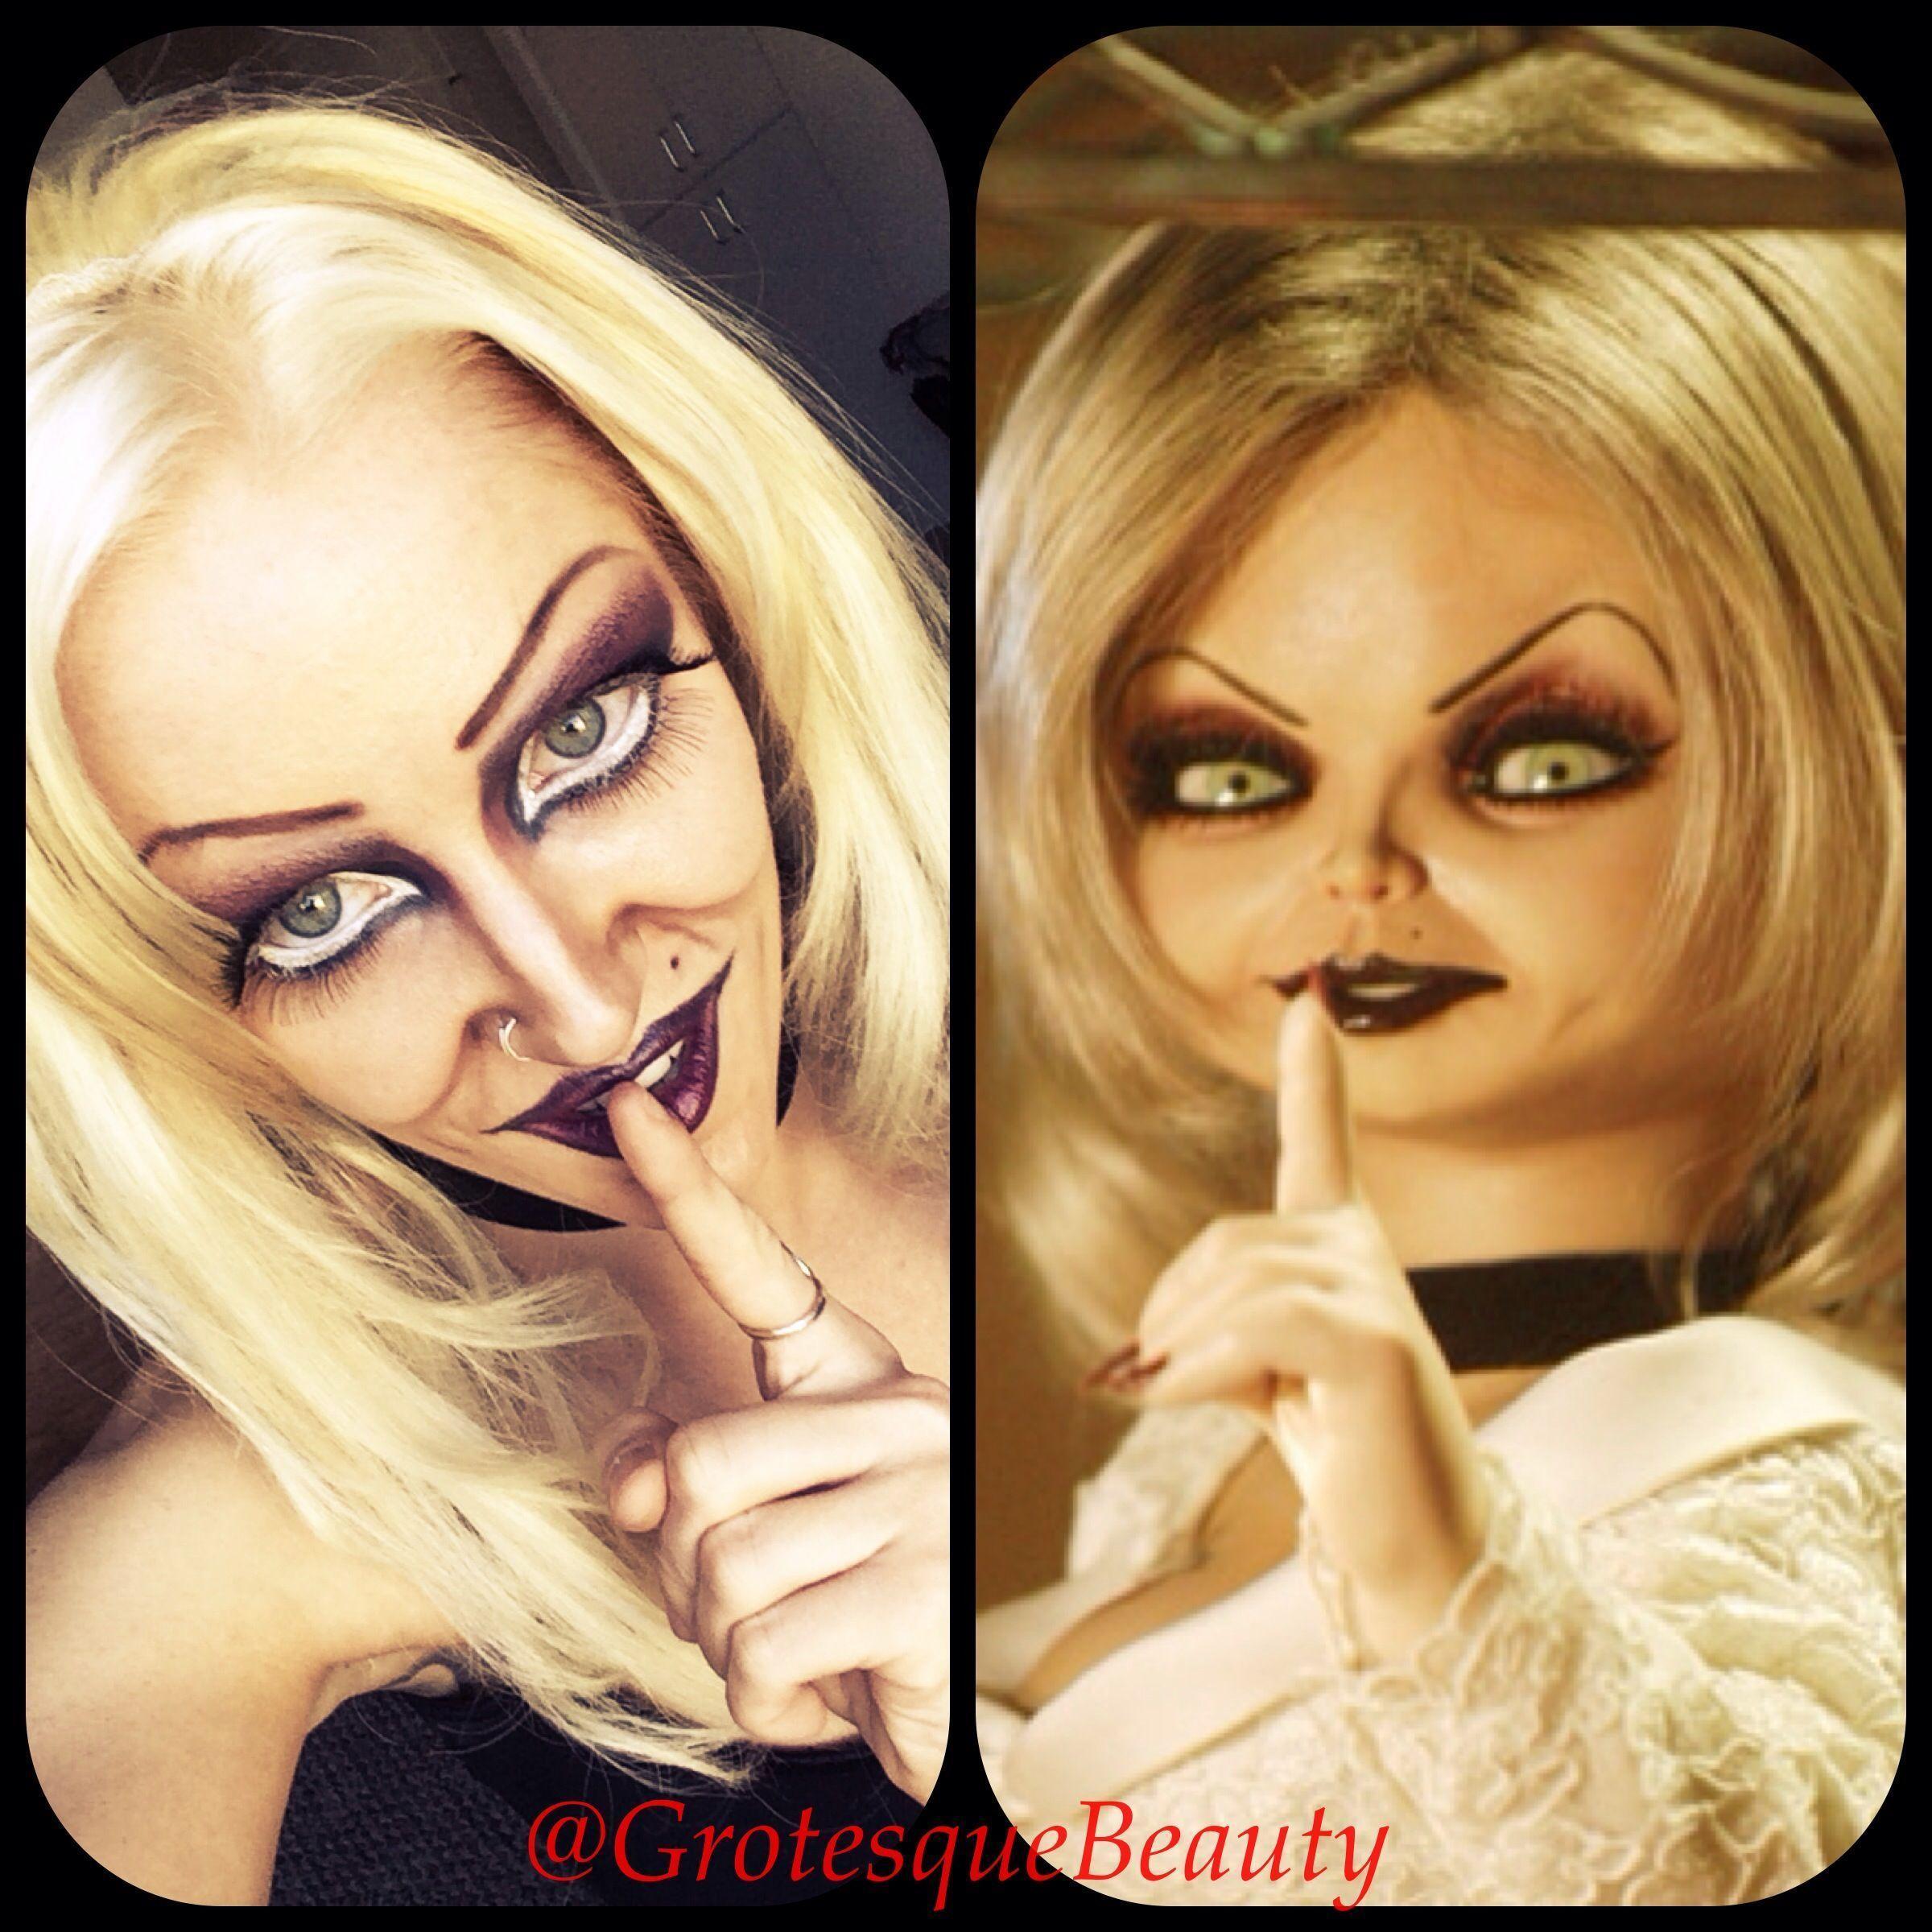 image For > Bride Of Chucky Wallpaper